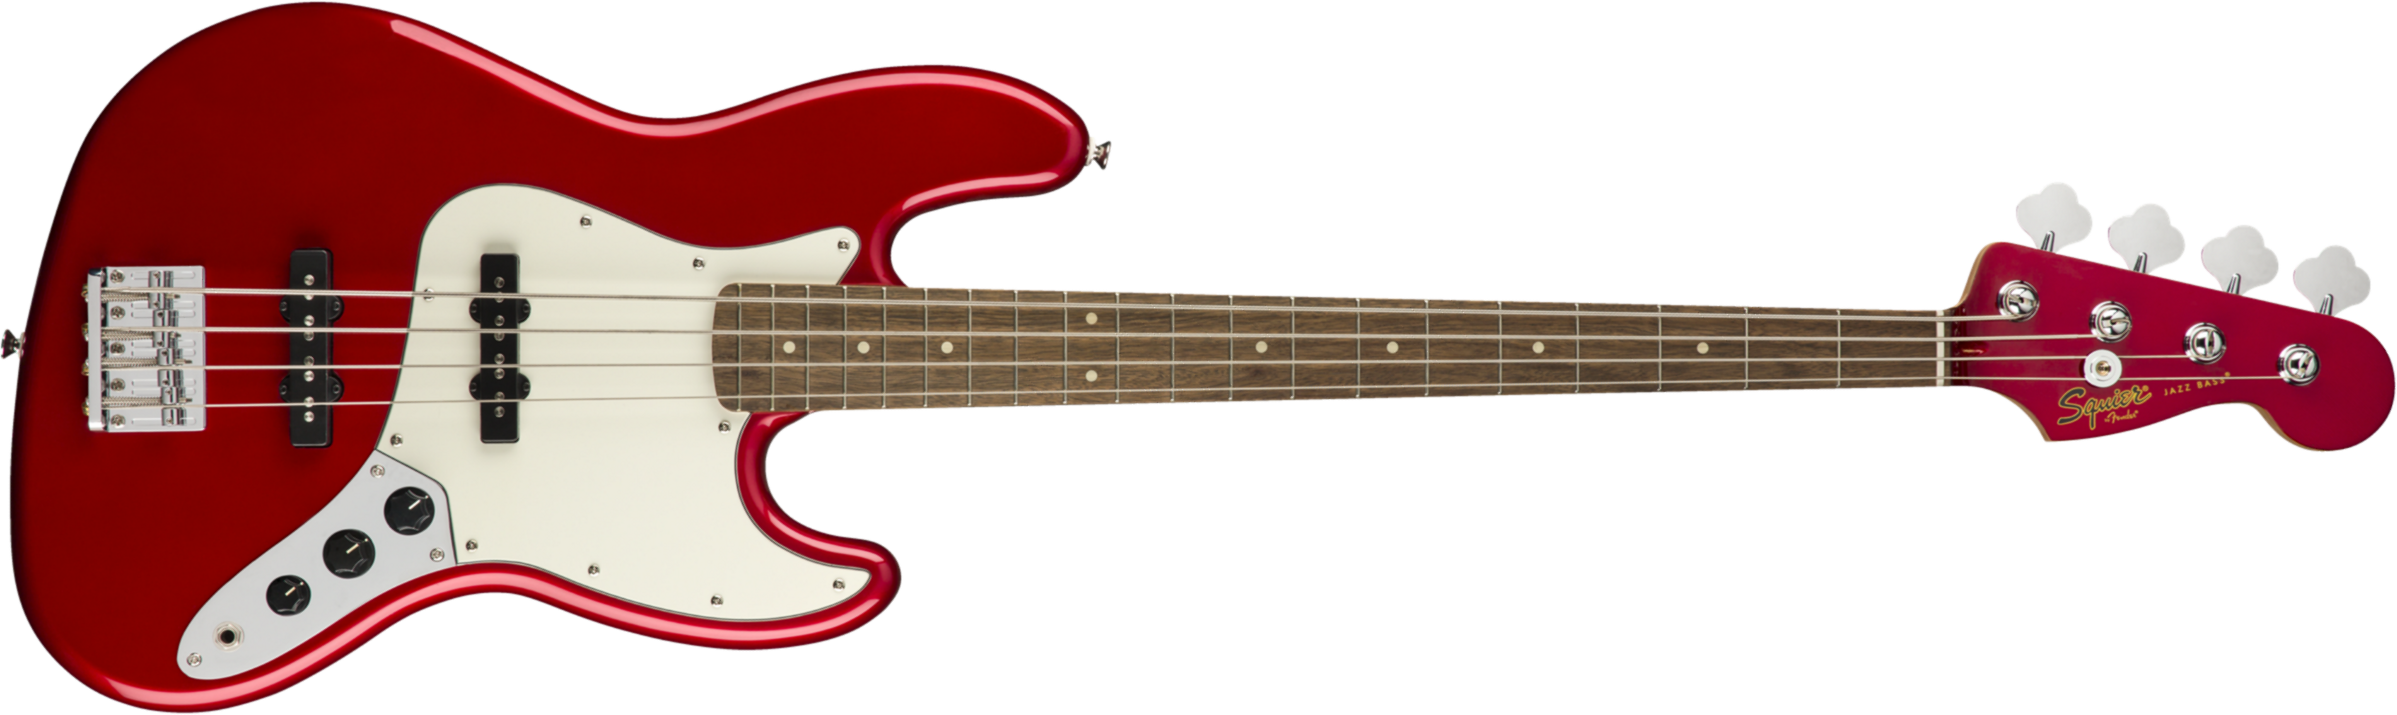 Squier Contemporary Jazz Bass Lau - Metallic Red - Solid body electric bass - Main picture